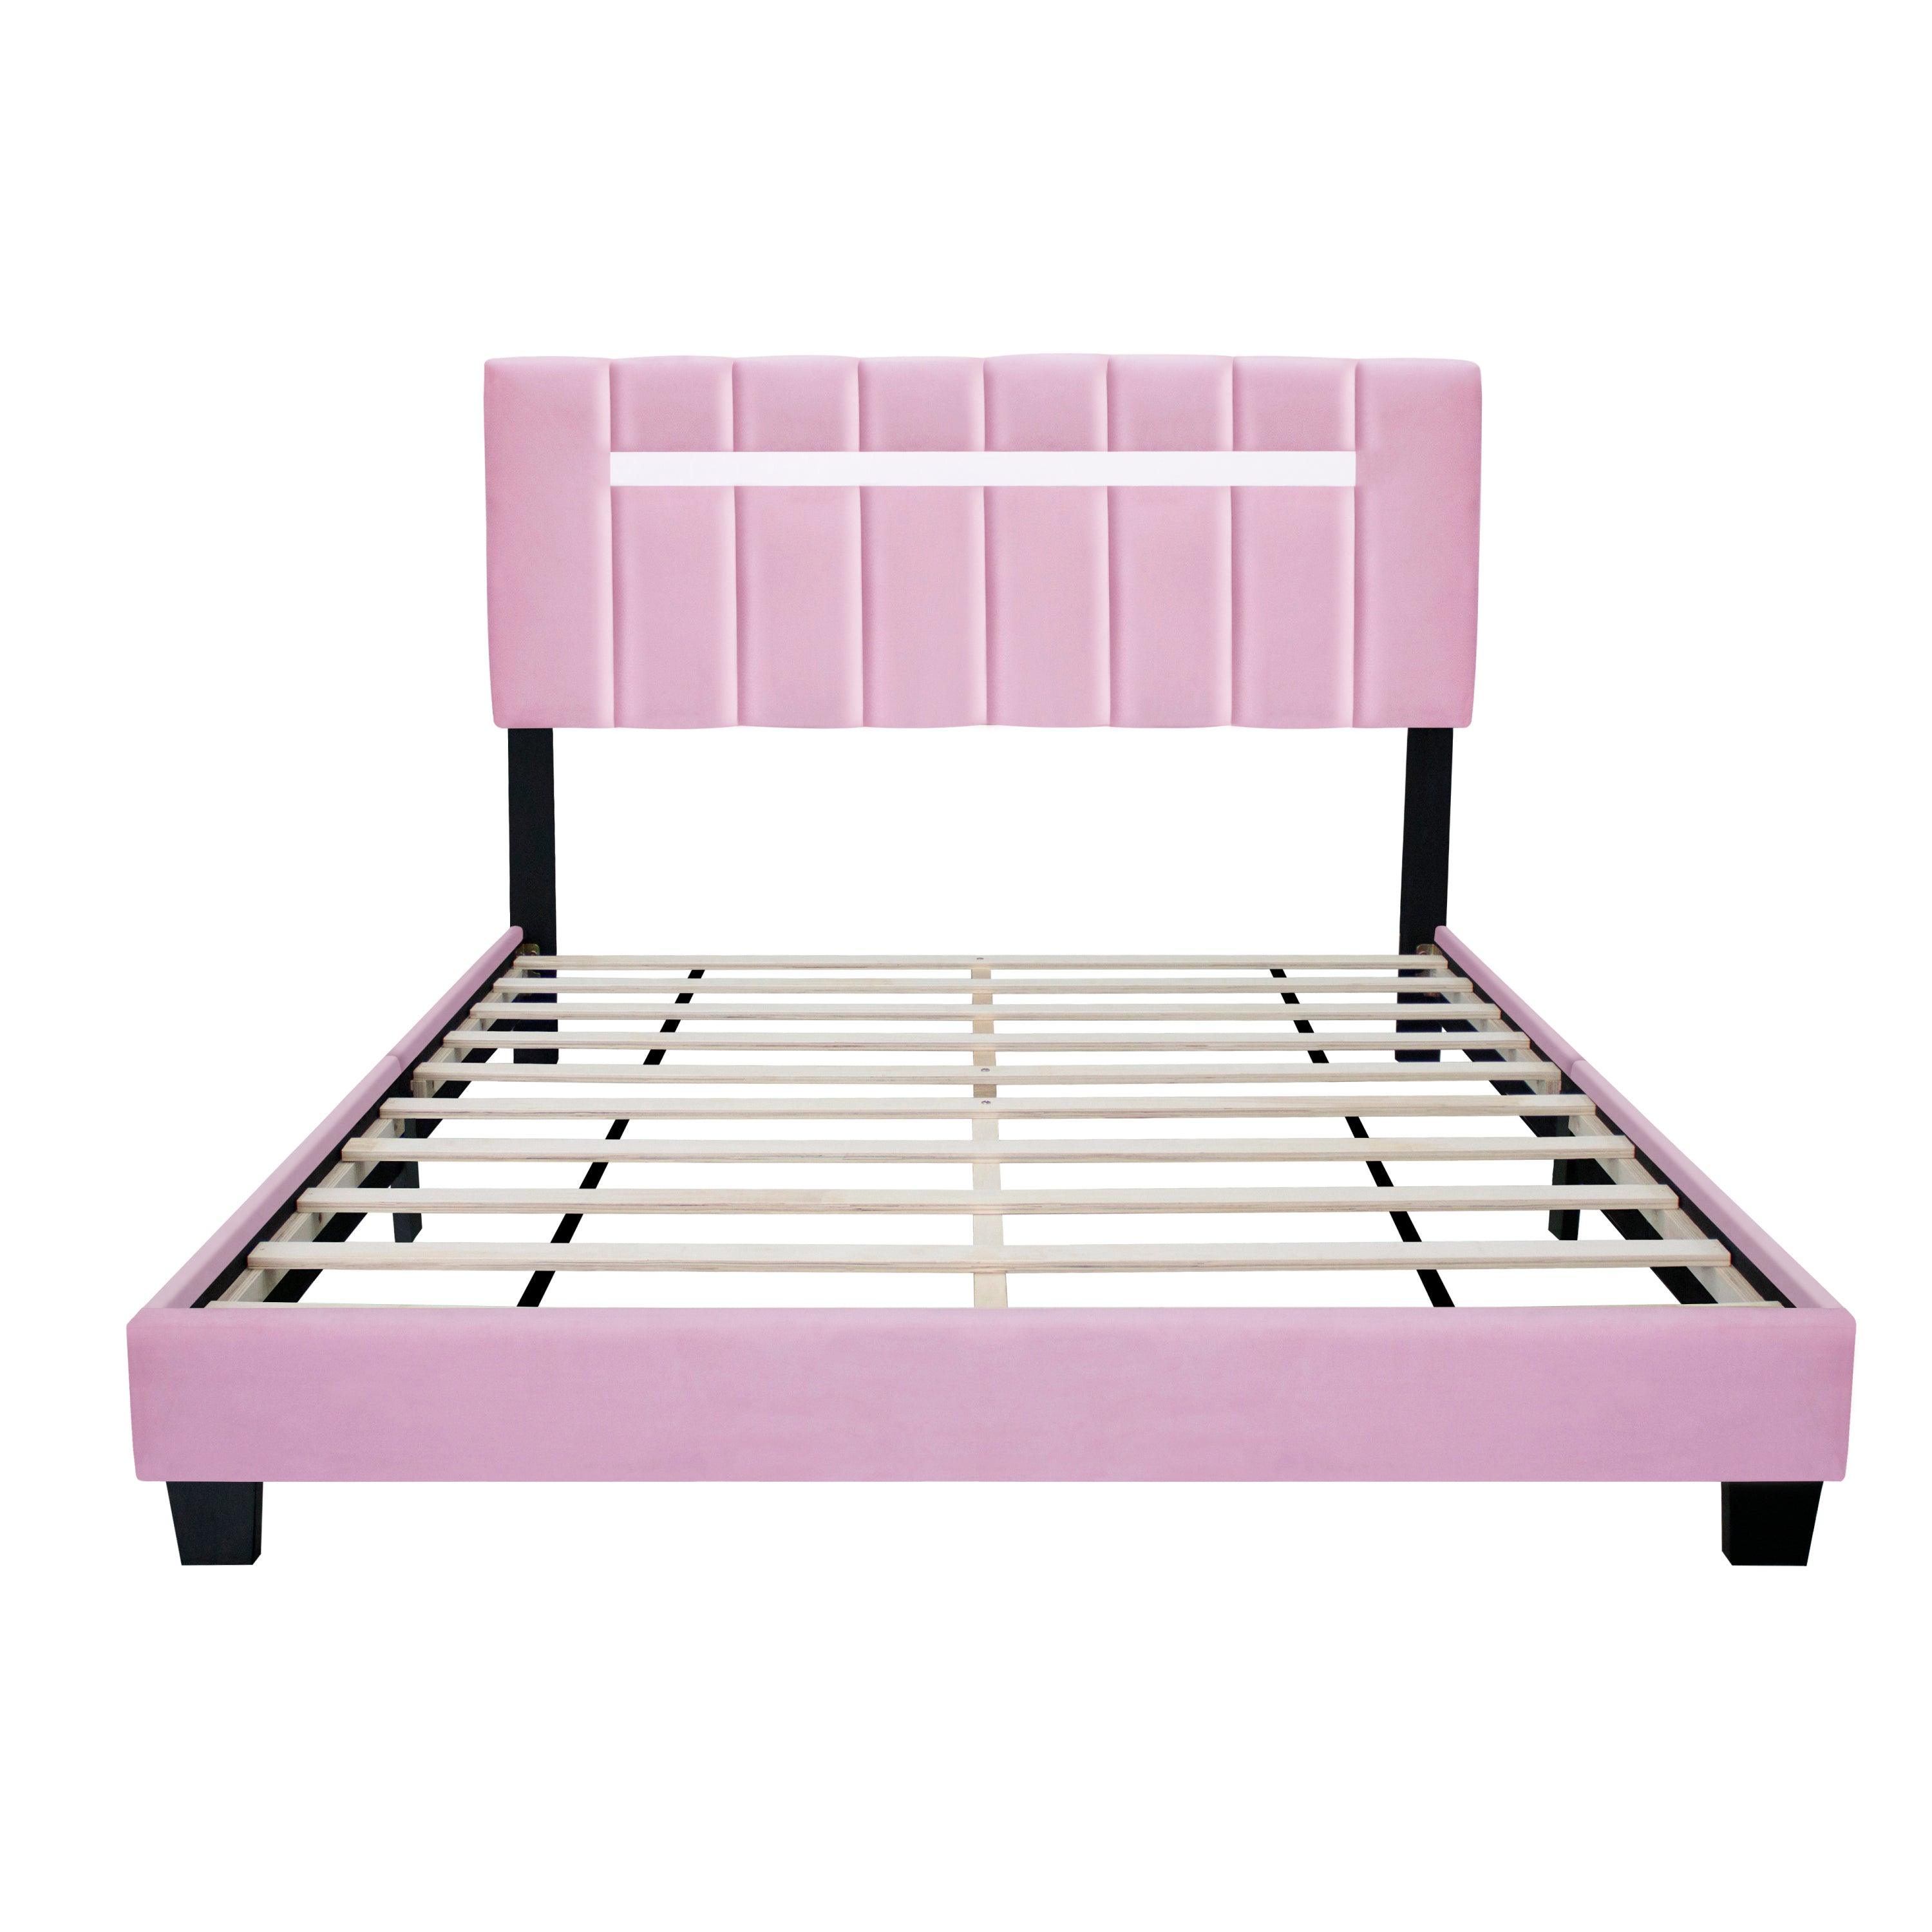 🆓🚛 Queen Size Upholstered Velvet Bed Frame With Adjustable Features, Pink